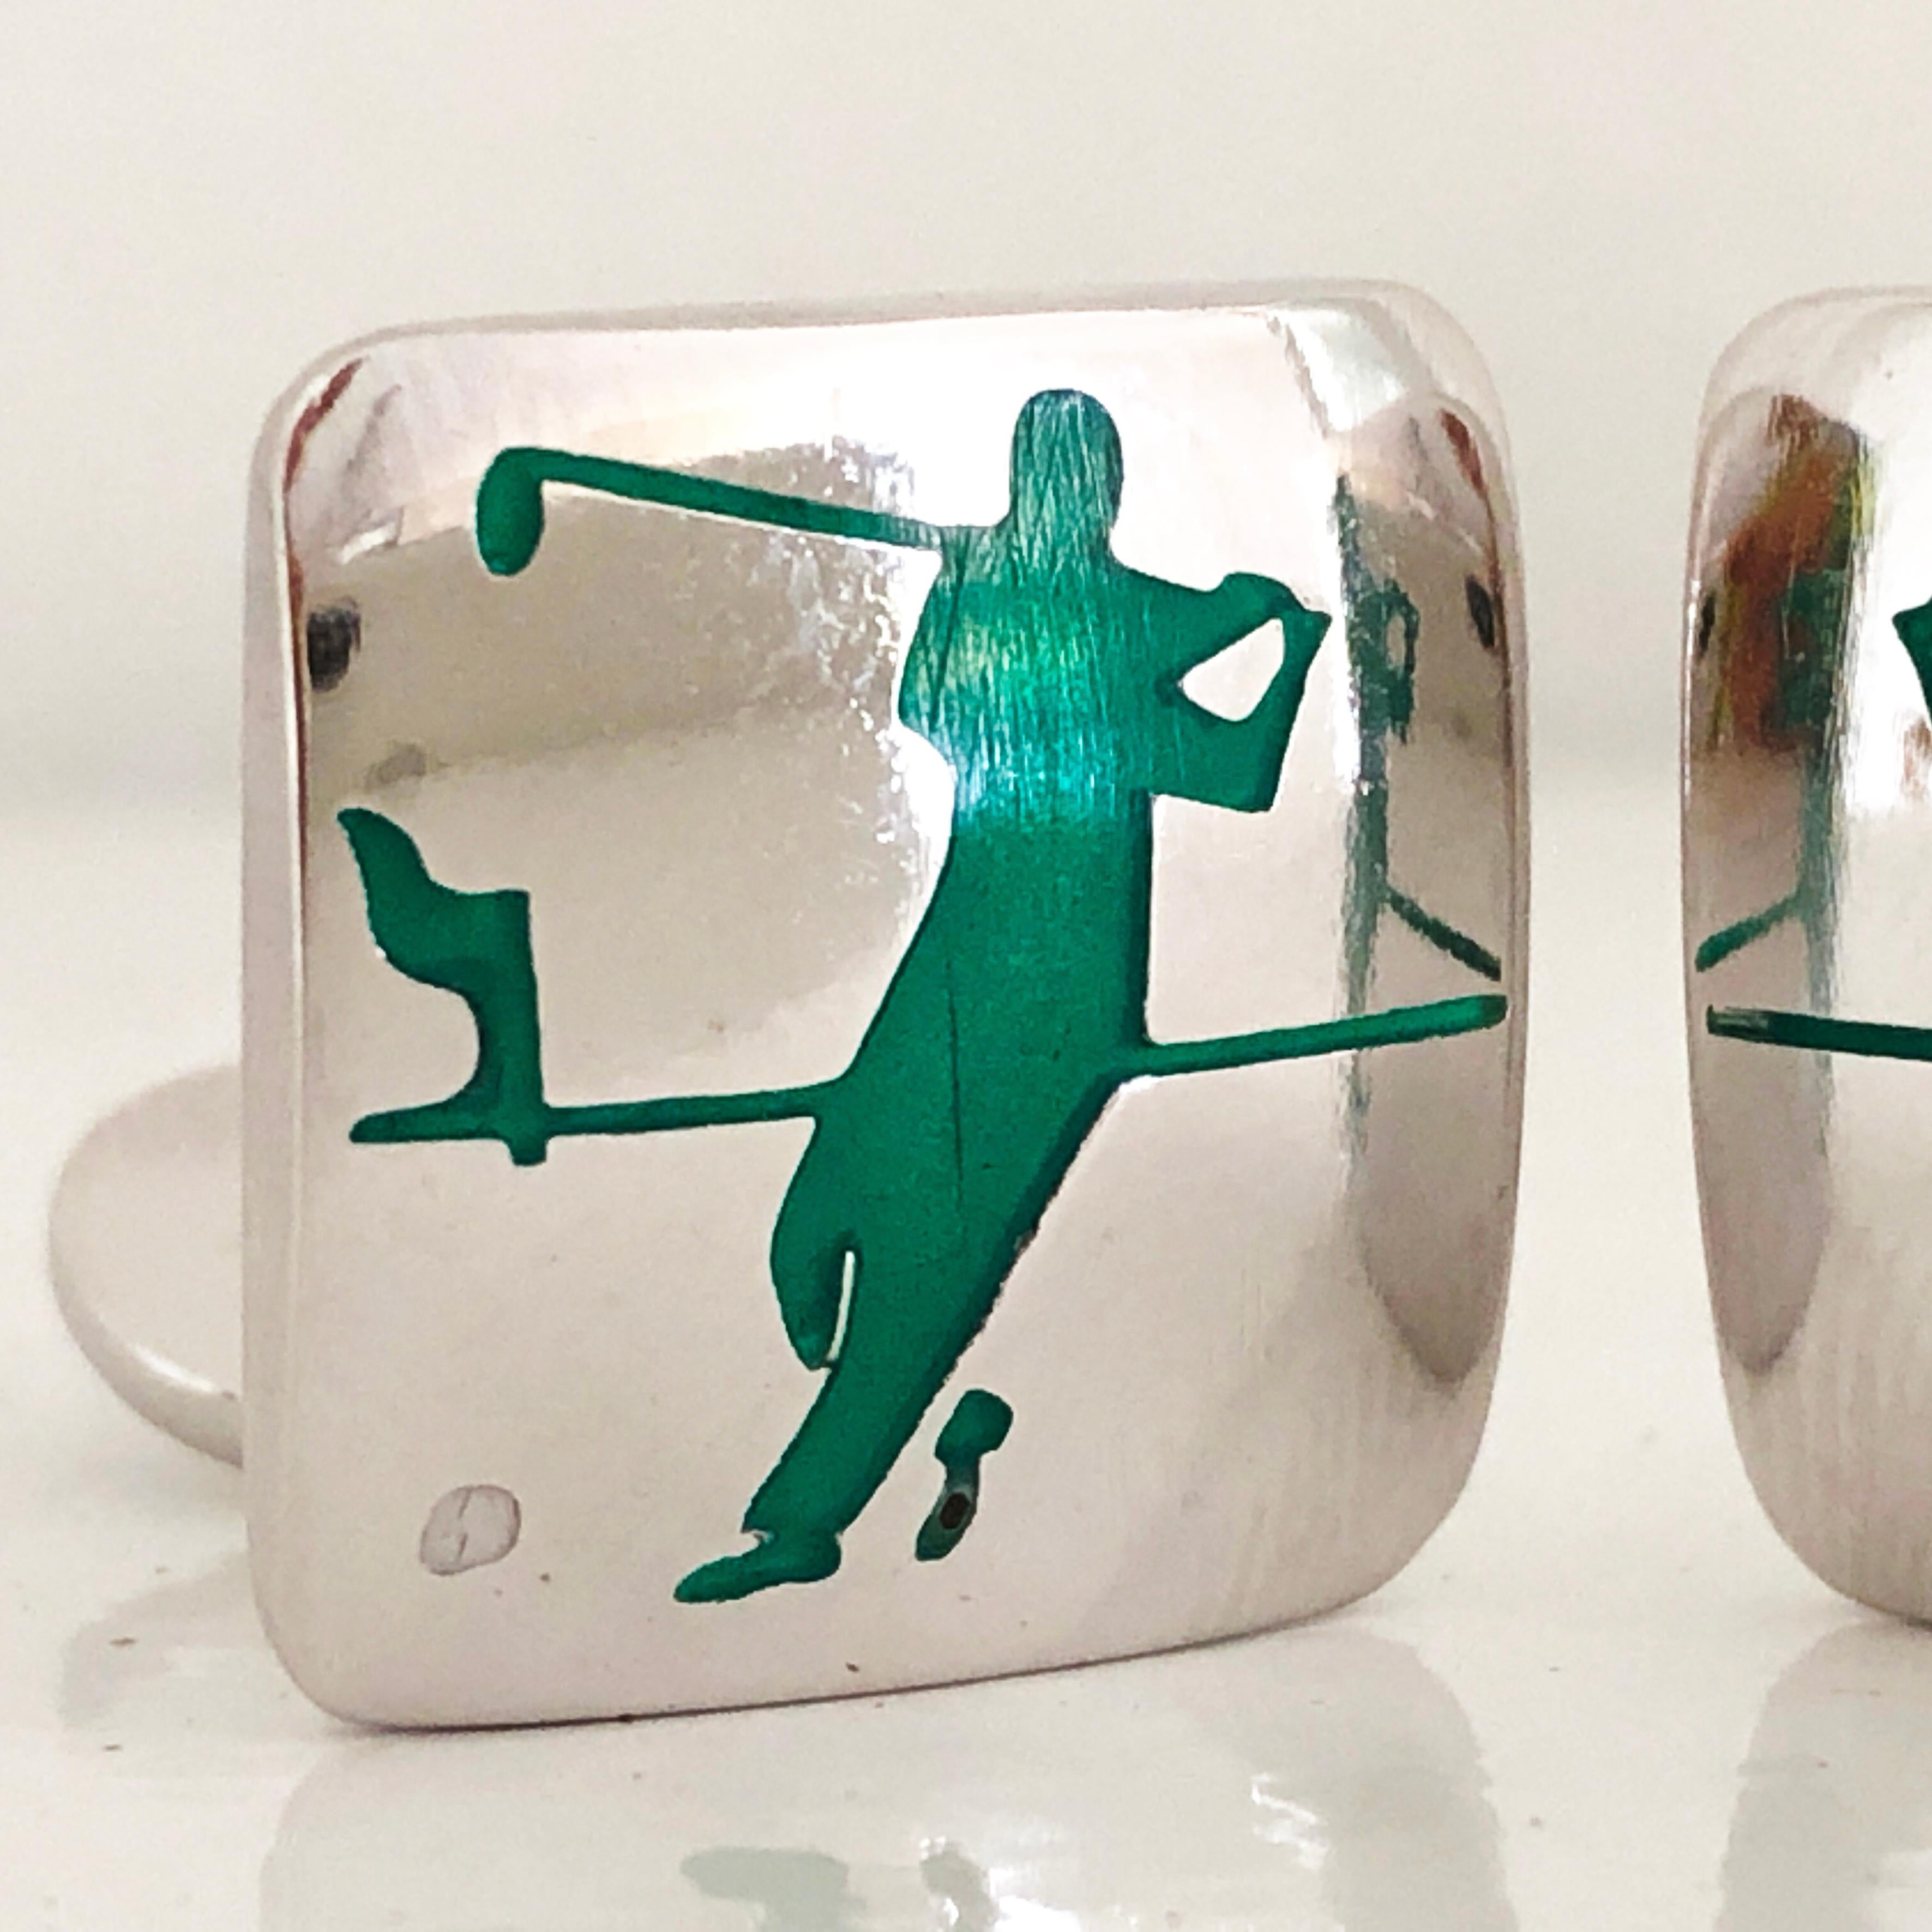 Unique, Chic Yet Timeless Hand Enameled Green Golf Player White Little Ball Squared Shaped Solid Sterling Silver Cufflinks.

In our Smart Black Box and Pouch